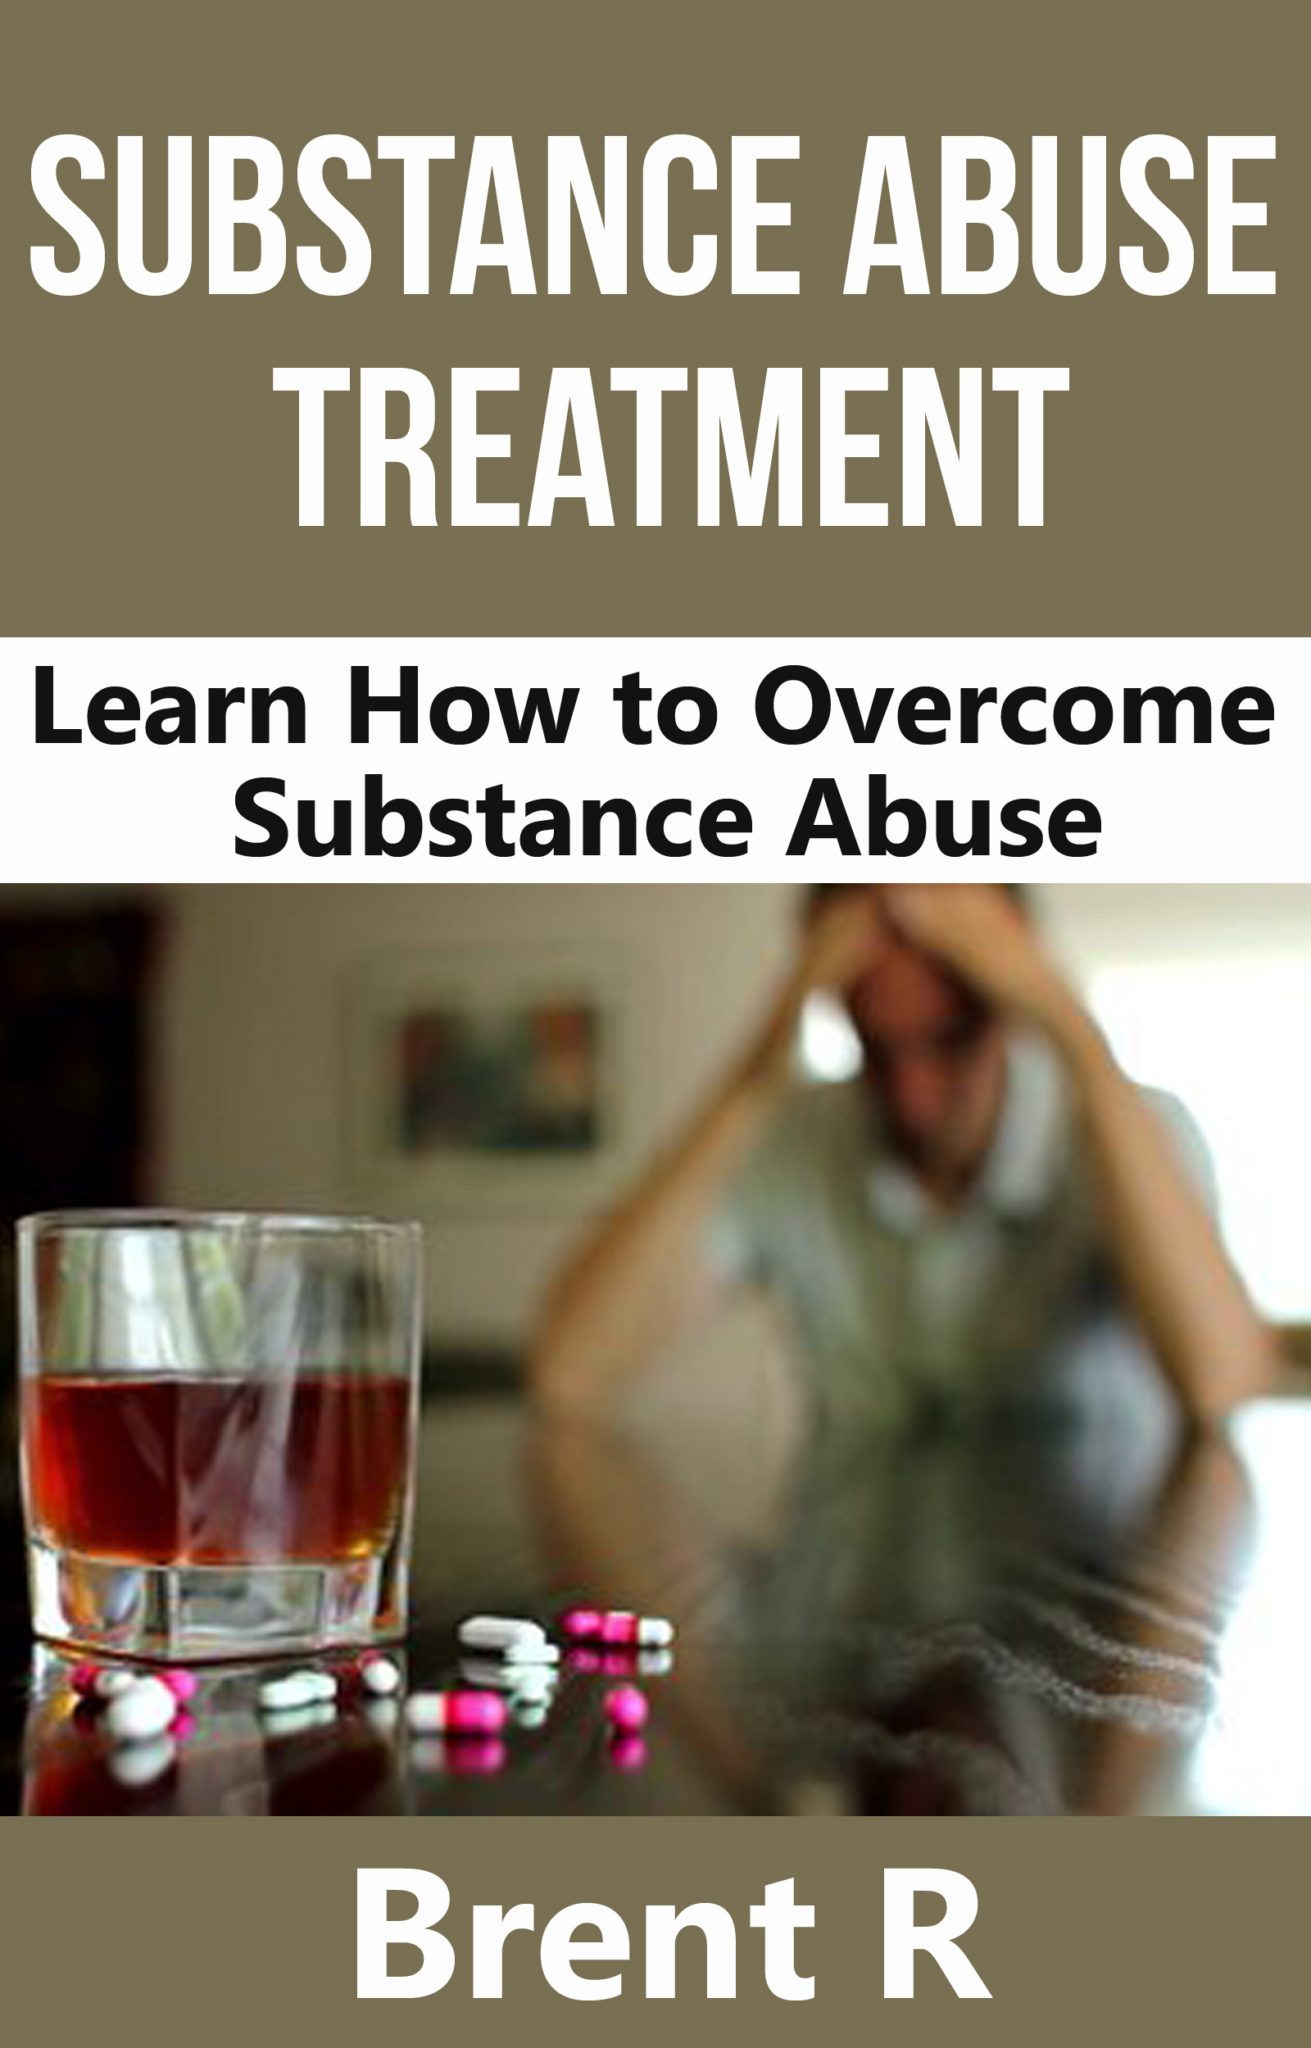 Substance Abuse Treatment: Learn How To Overcome Substance Abuse by Brent R